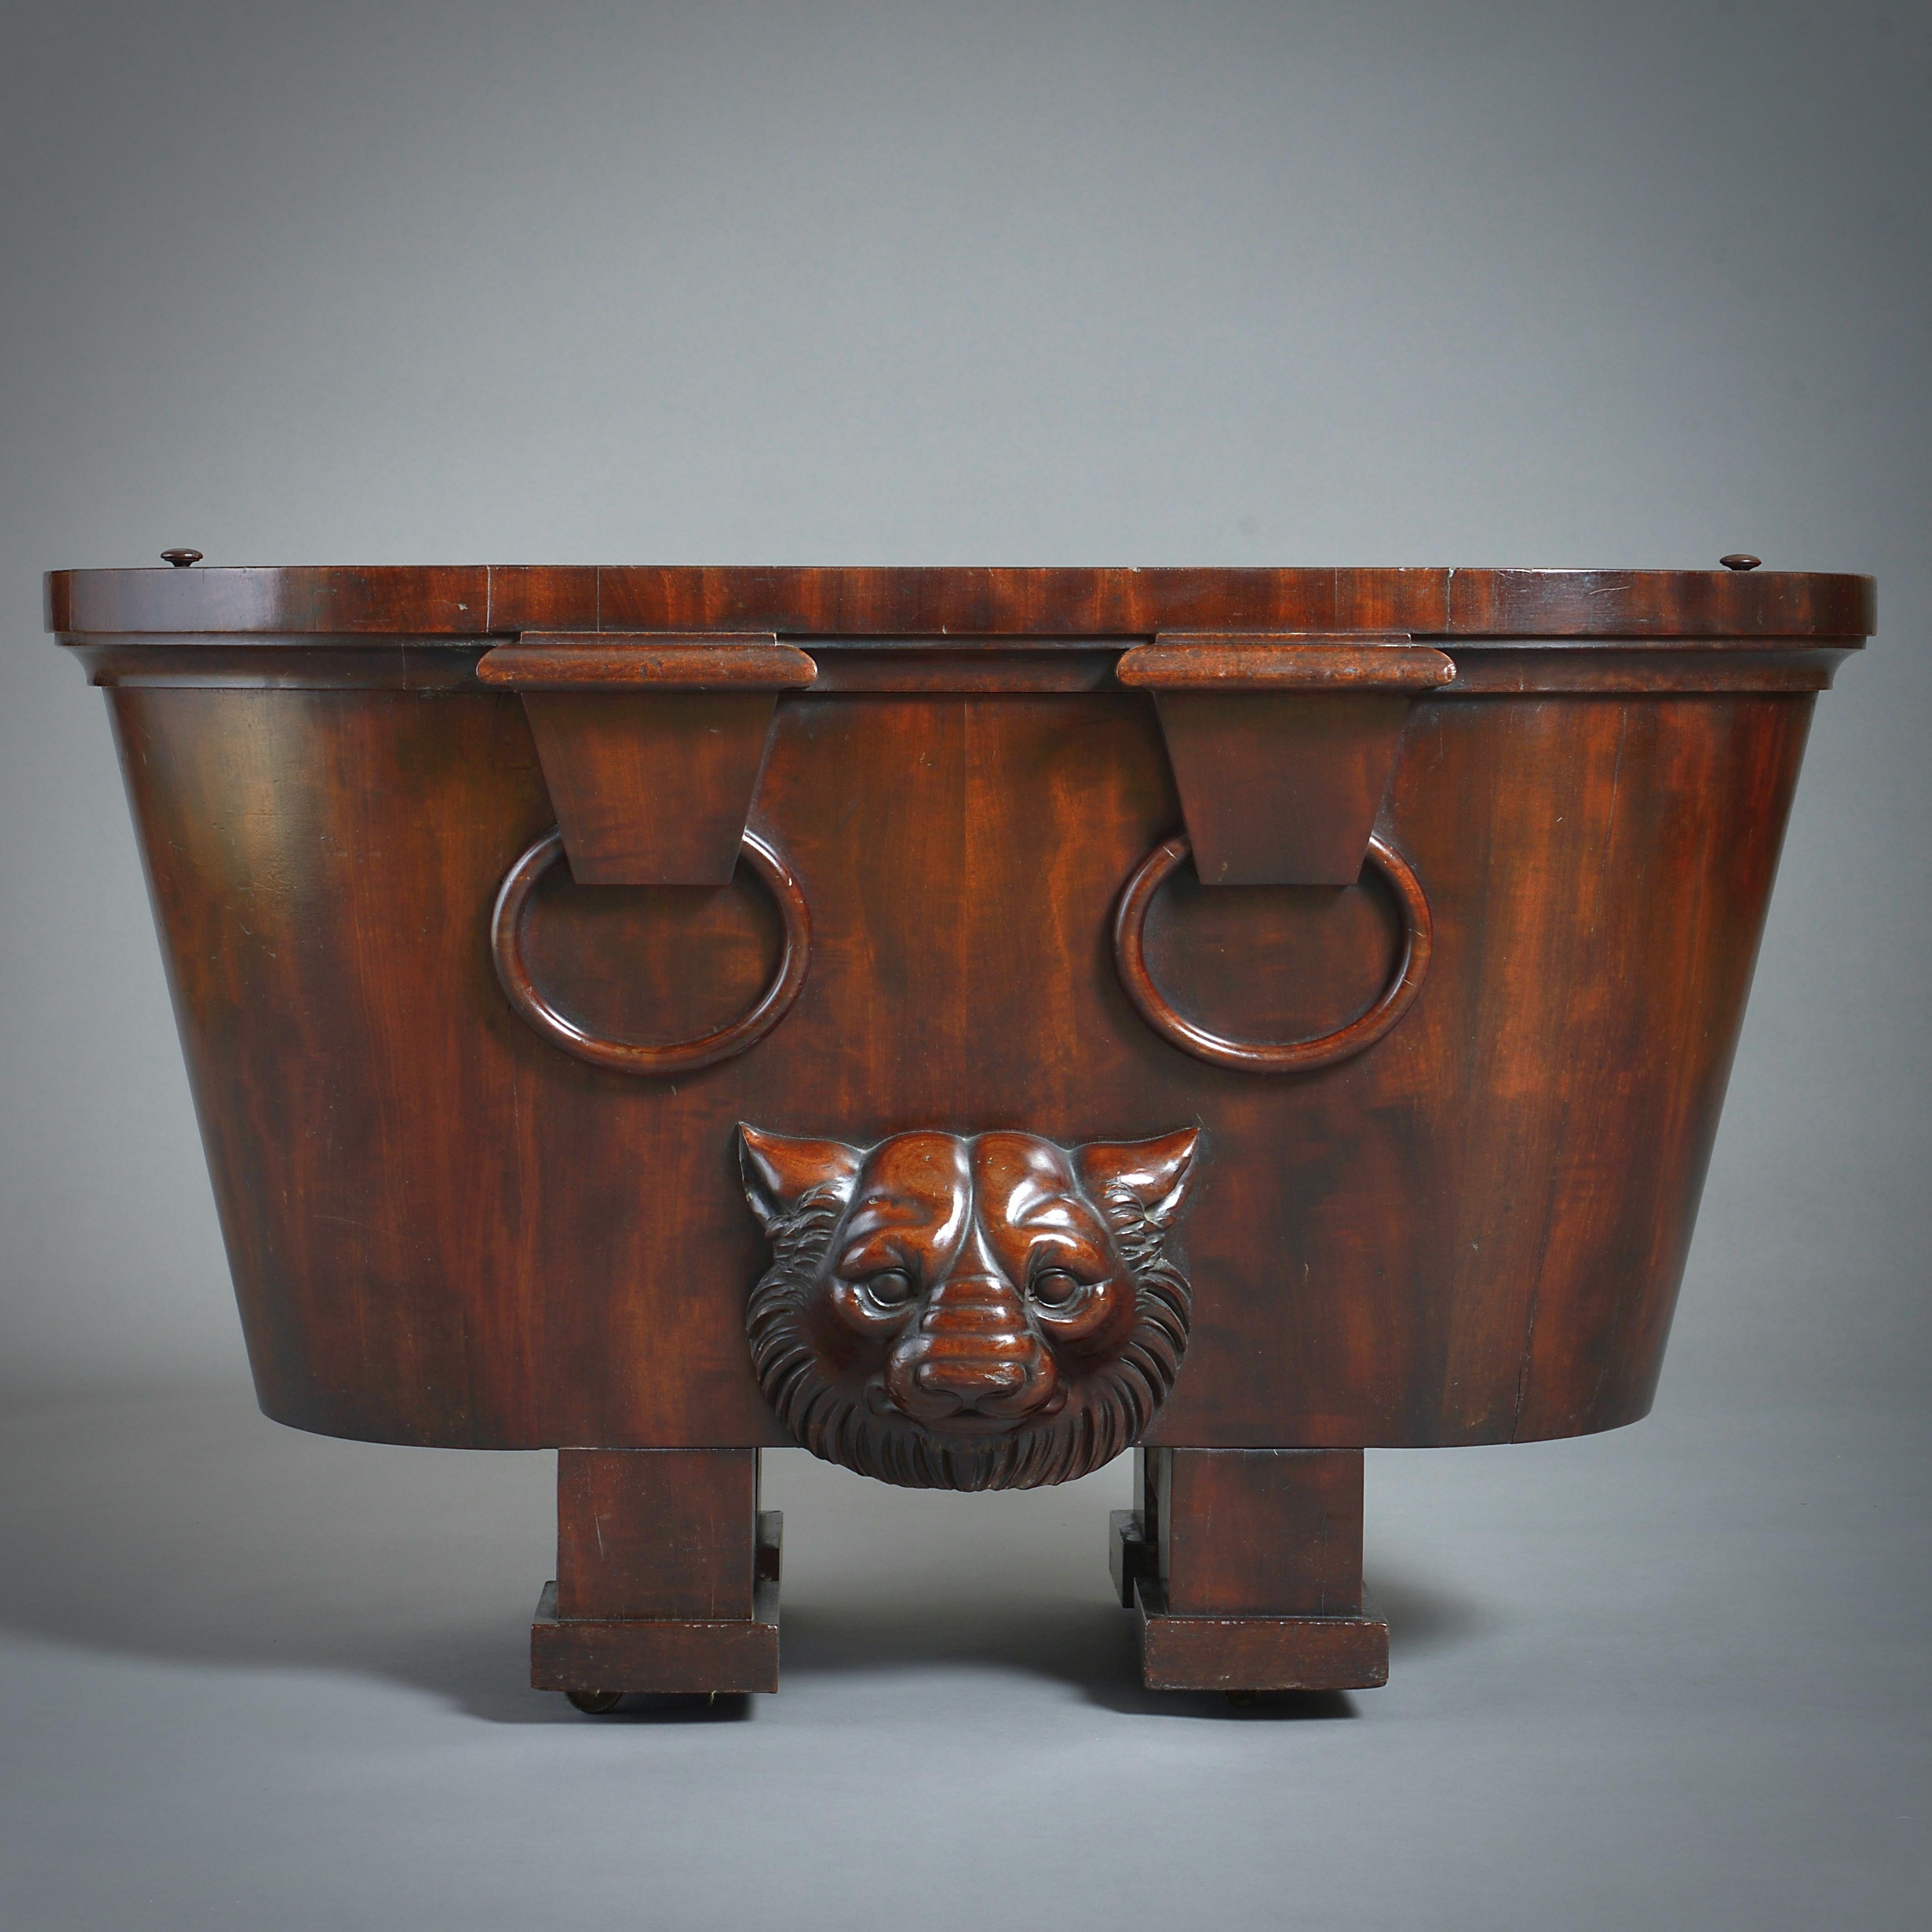 Regency Mahogany Wine-Cooler after a design by Thomas Hope For Sale 1